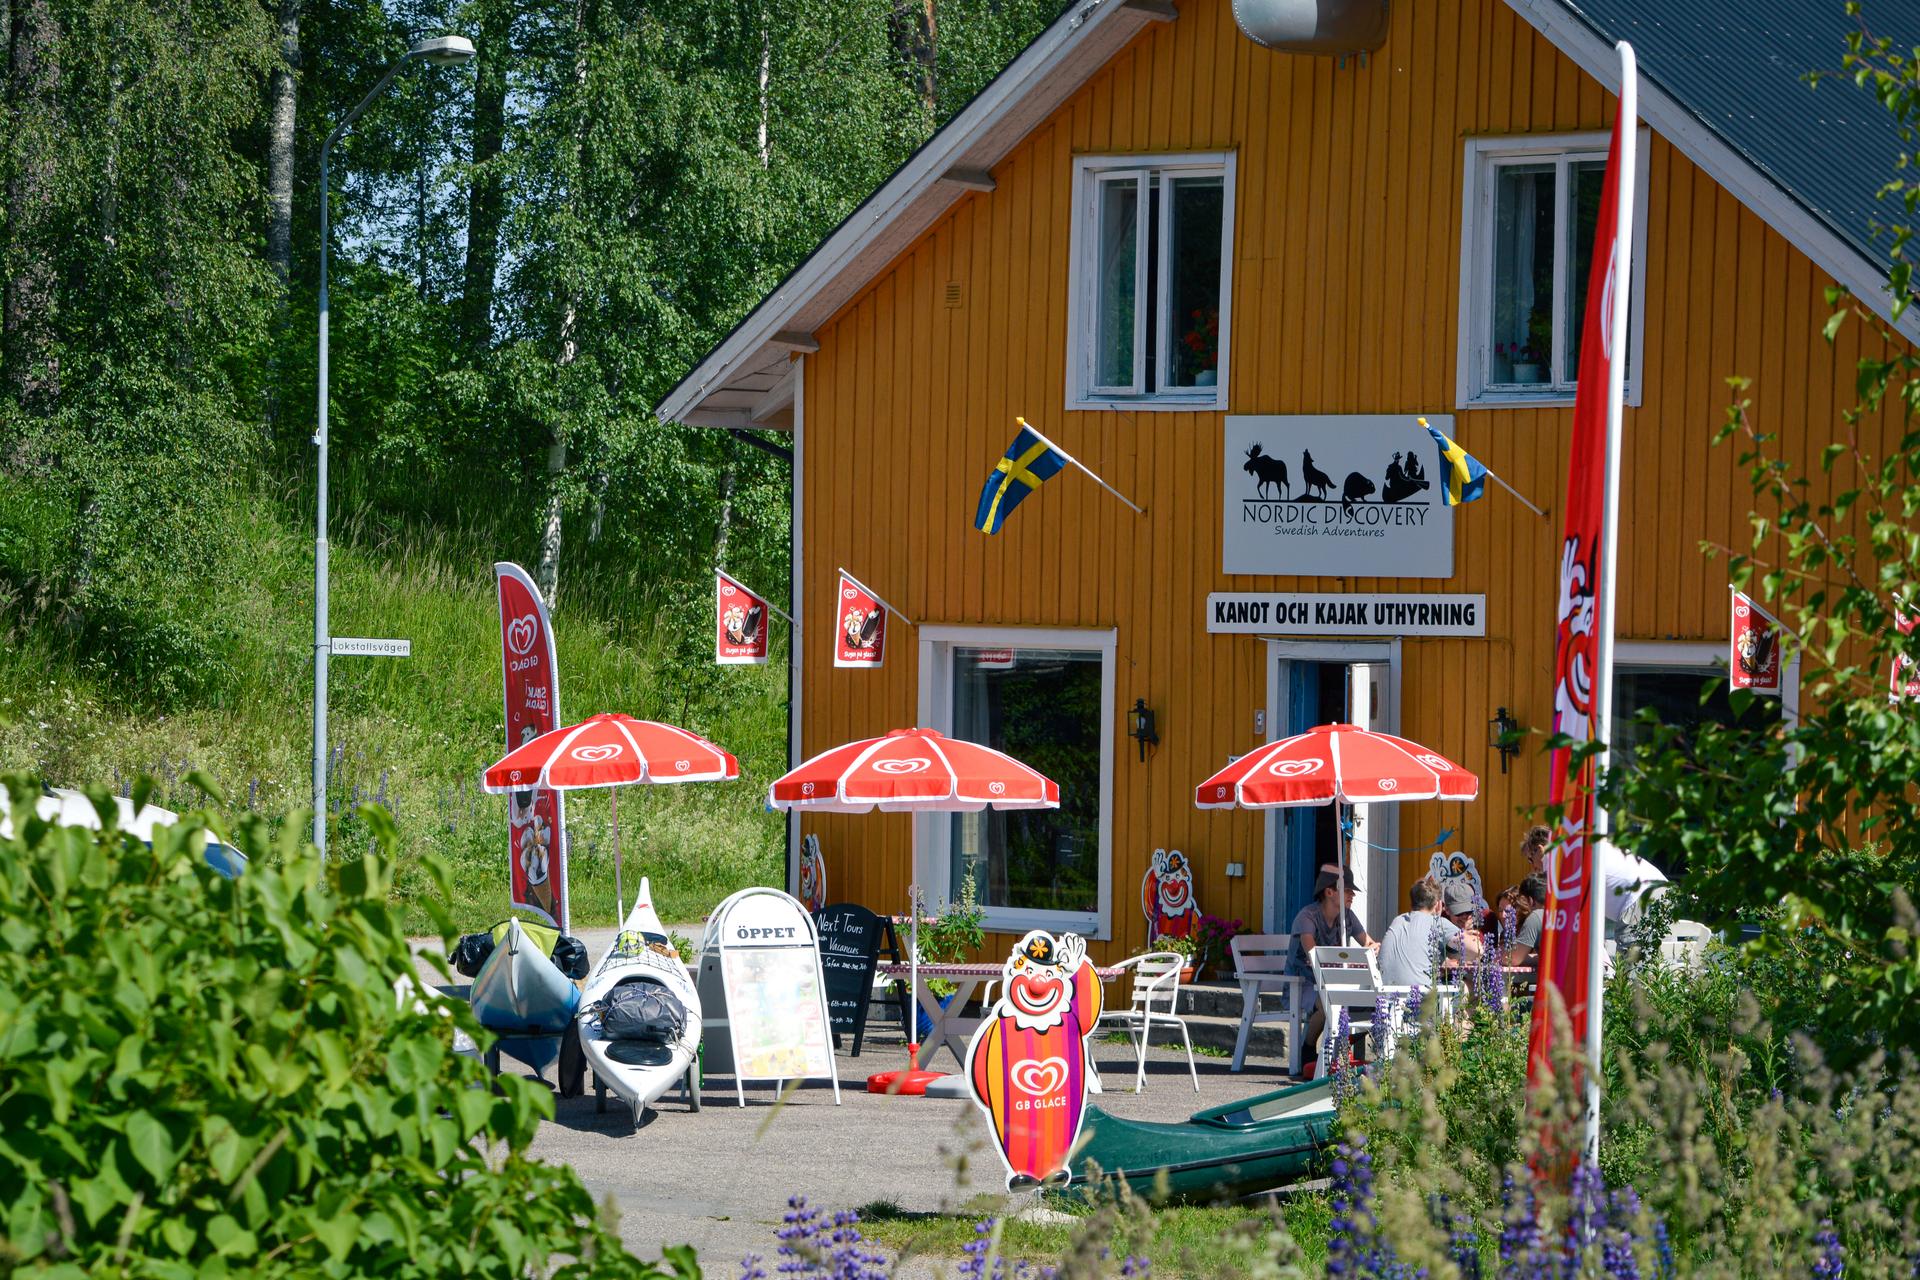 The adventure center during summer, with canoes, kayaks, and people receiving briefings.